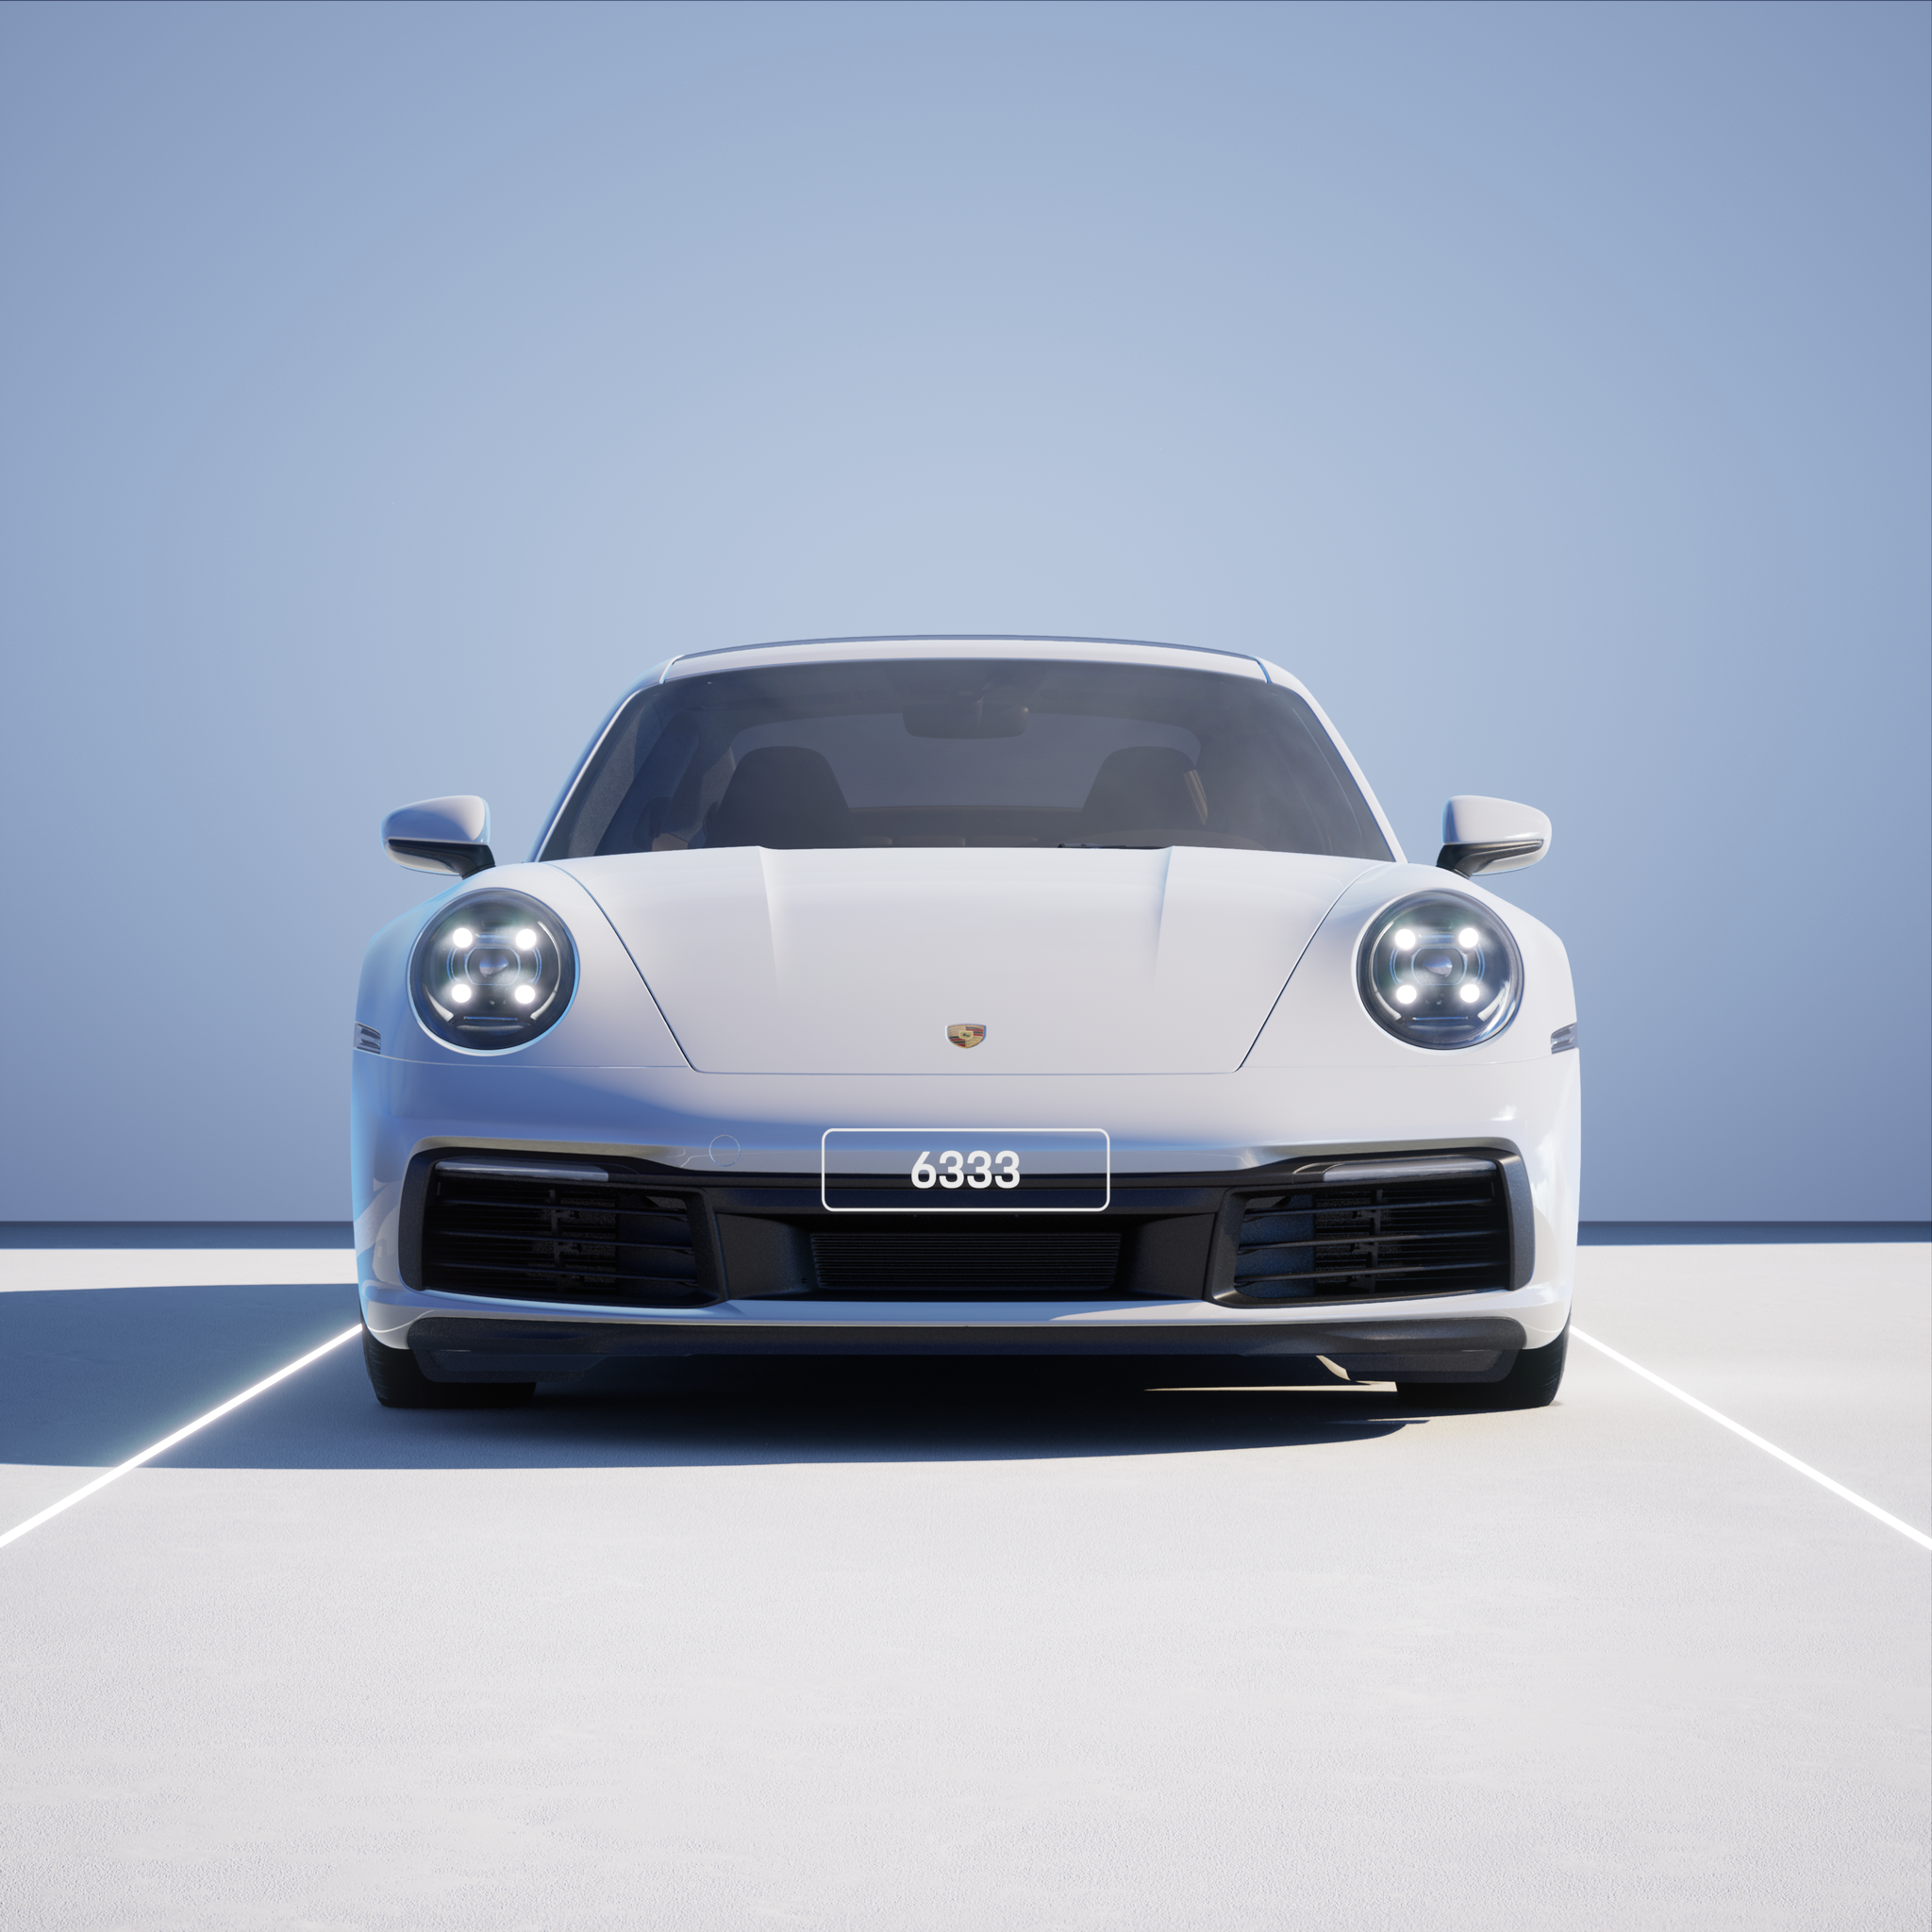 The PORSCHΞ 911 6333 image in phase